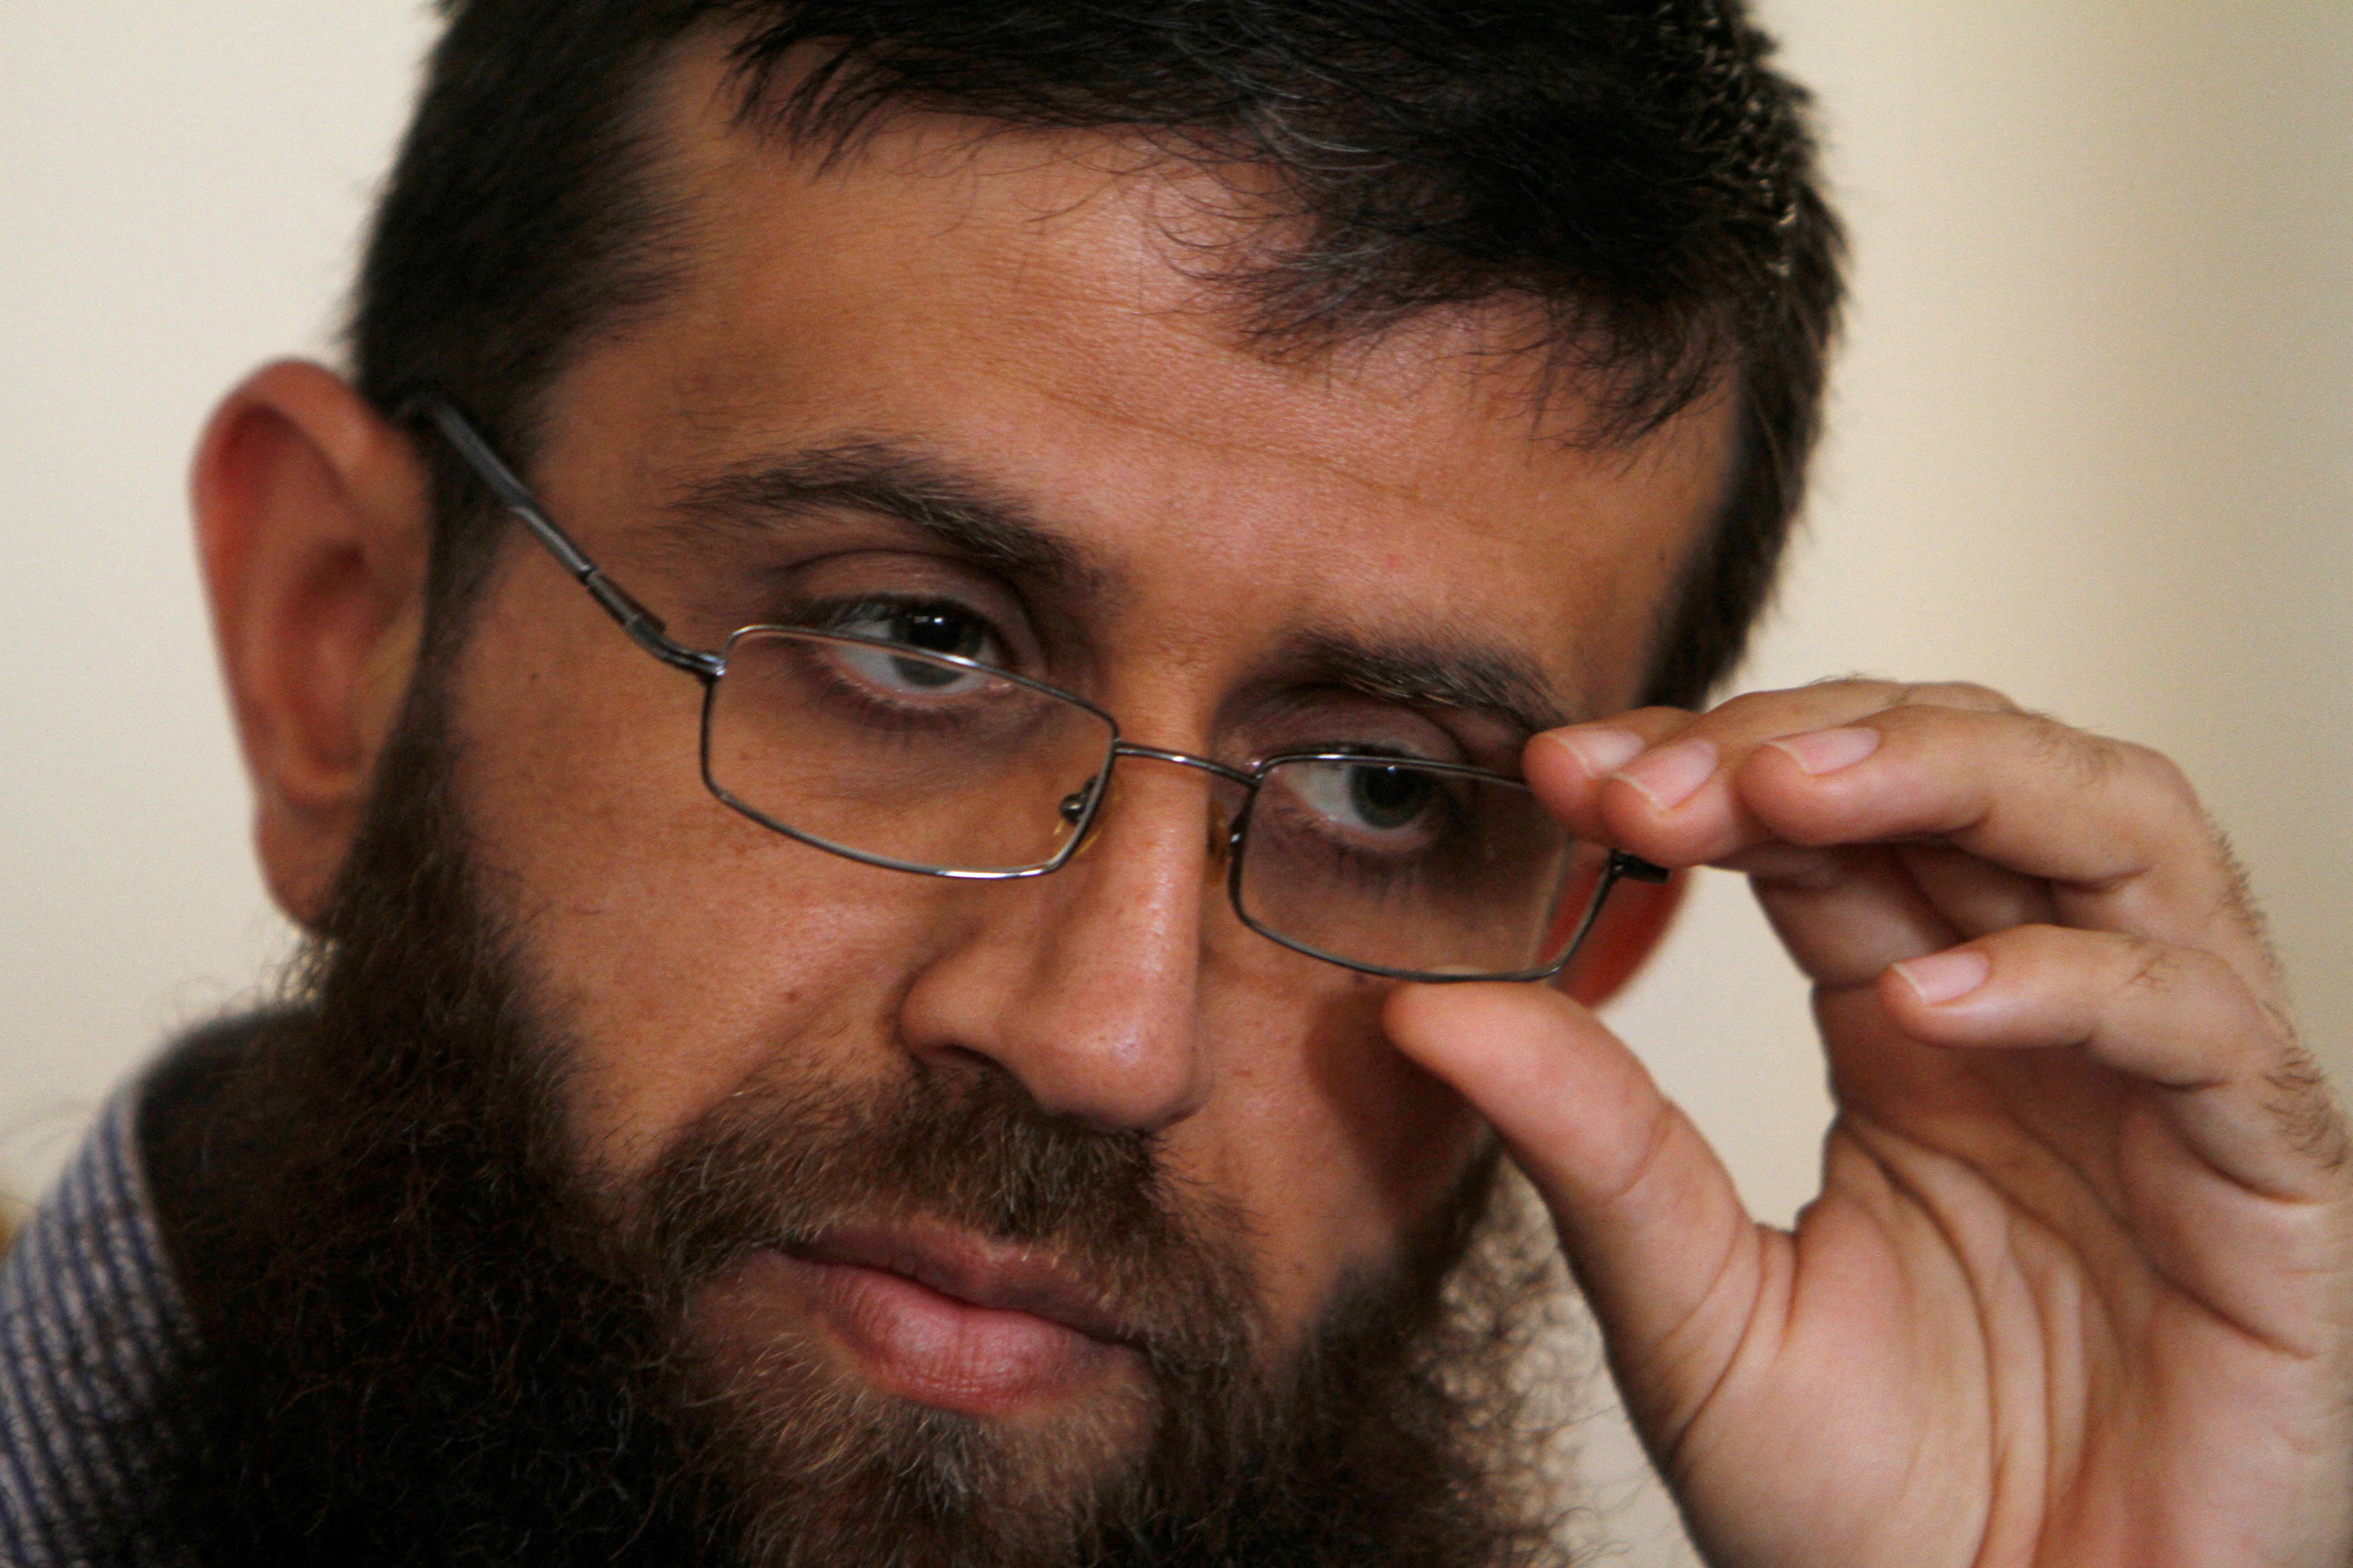 Khader Adnan, a leader of Islamic Jihad and survivor of a 66-day jail fast, speaks from a Jenin refugee camp in the West Bank city of Jenin